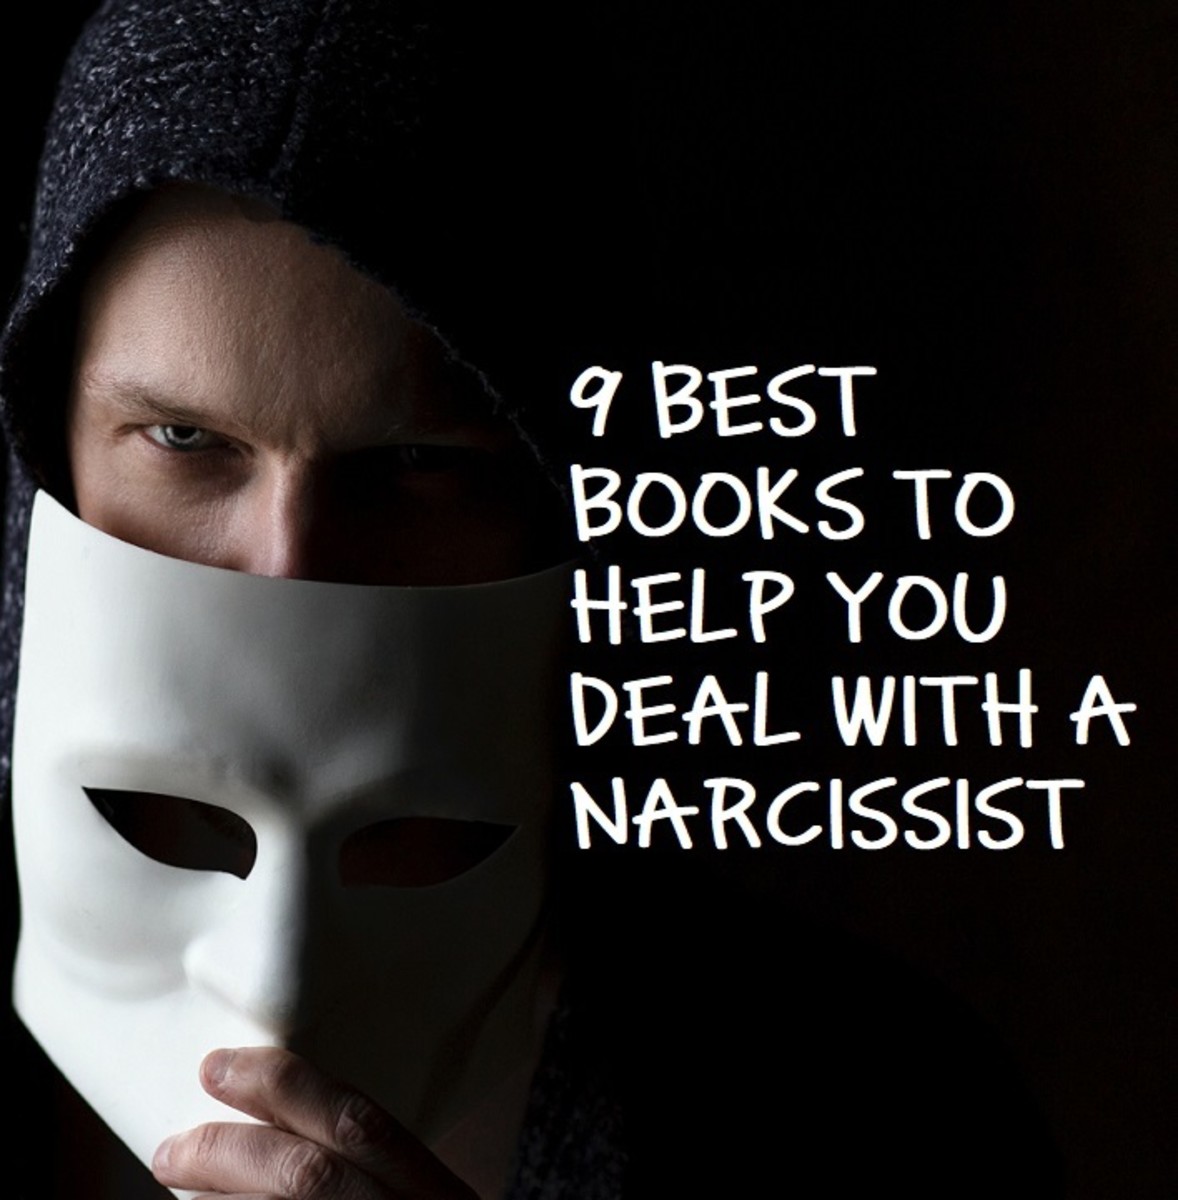 9 Best Books to Help You Deal With a Narcissist